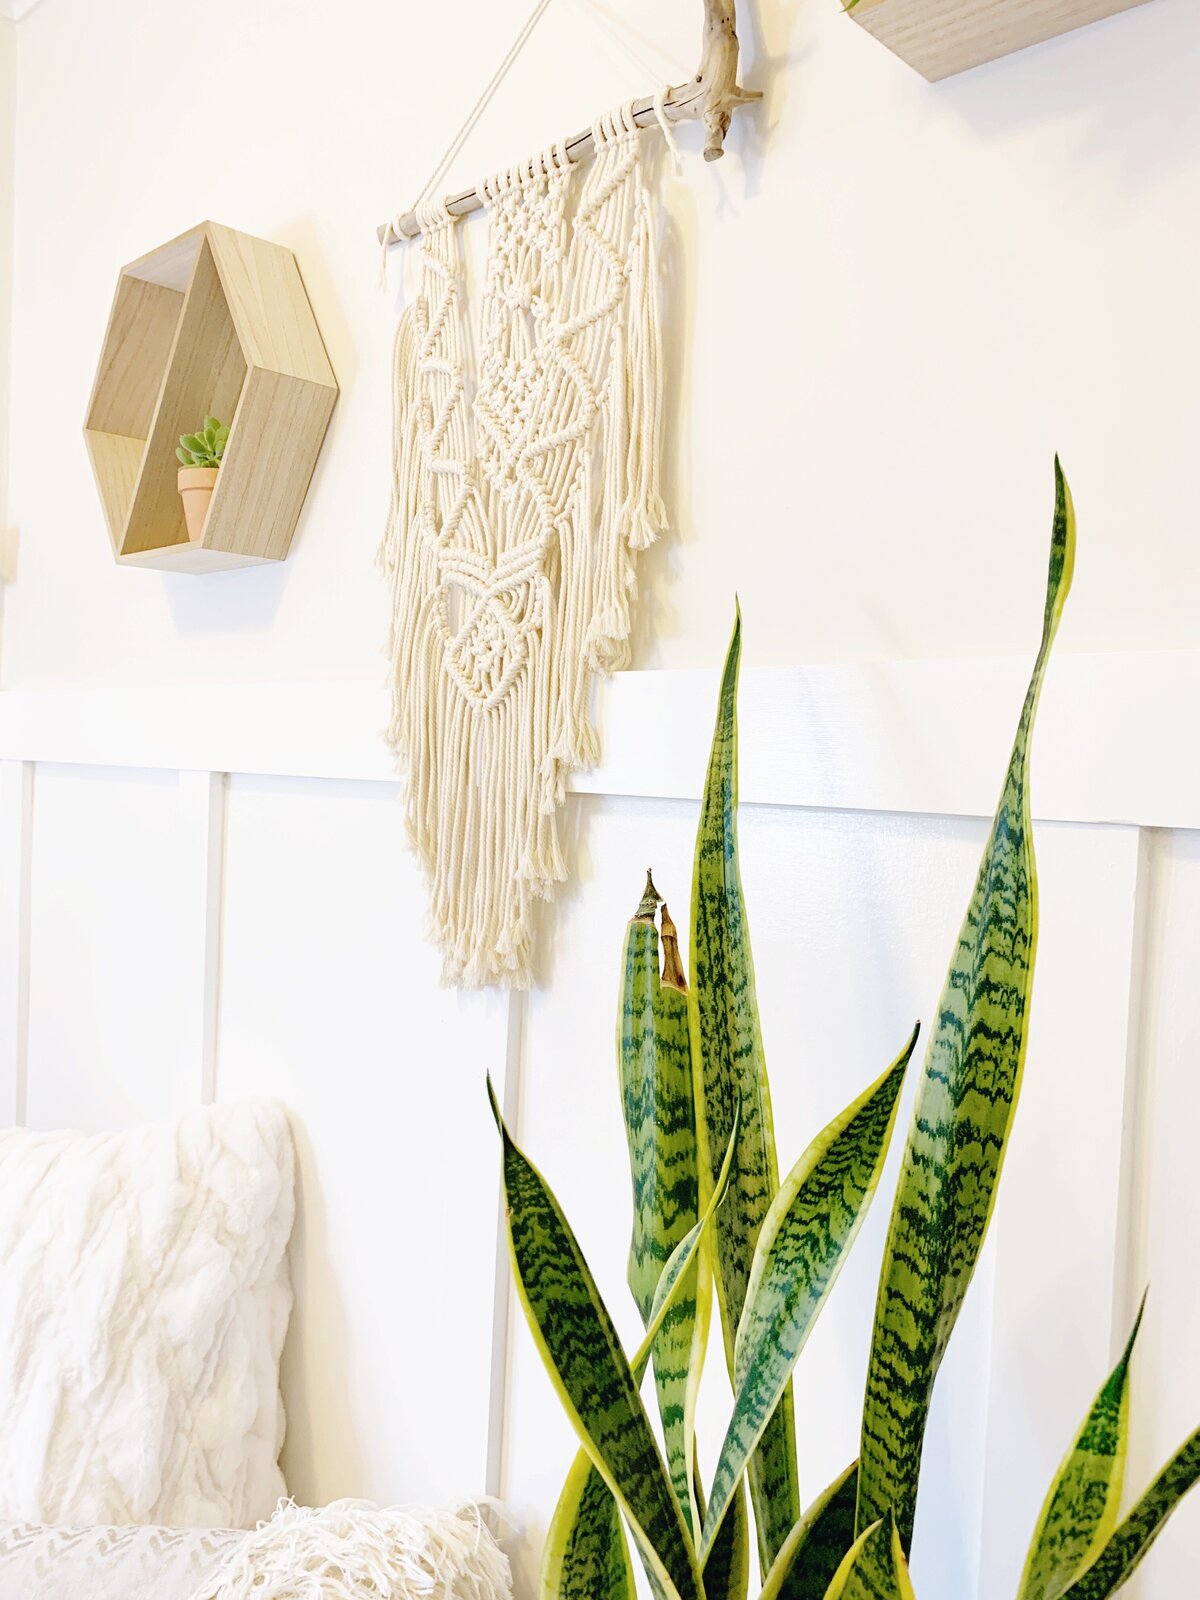 wall decor showing hexagon shelf and yarn wall hanging next to tall snake plant